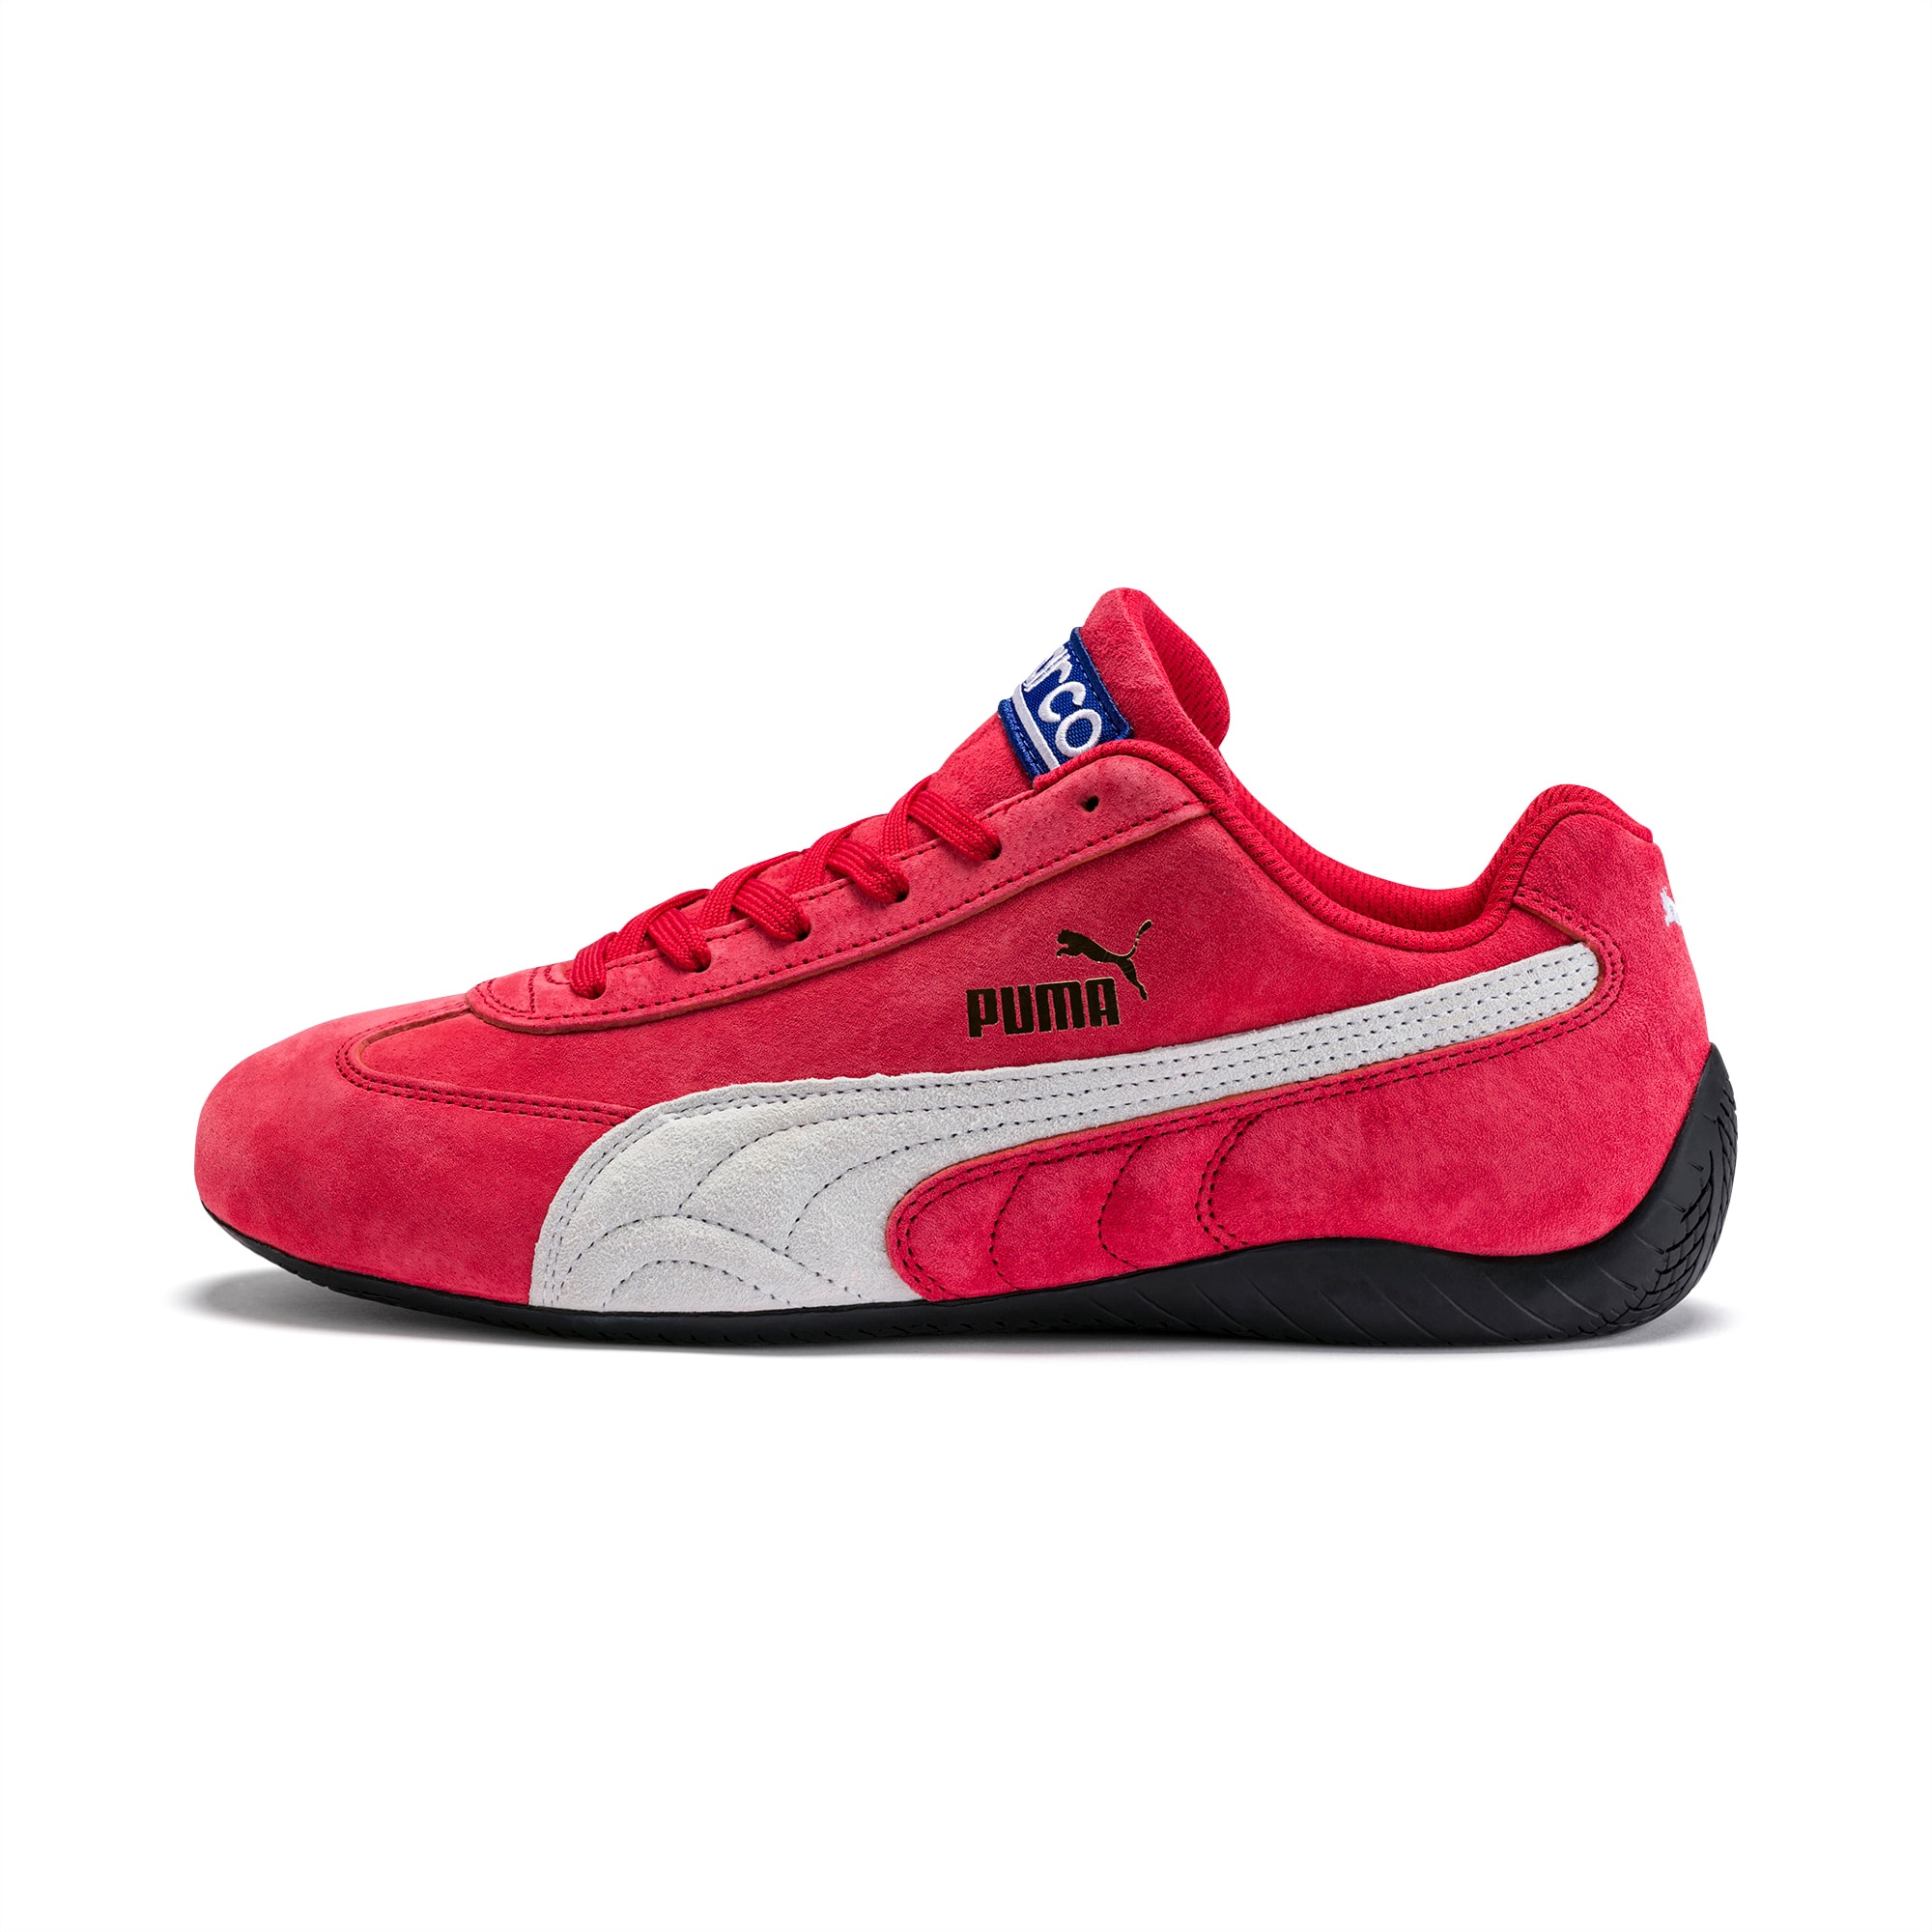 PUMA Chaussure Basket SpeedCat Sparco, Rouge/Blanc, Taille 40, Chaussures